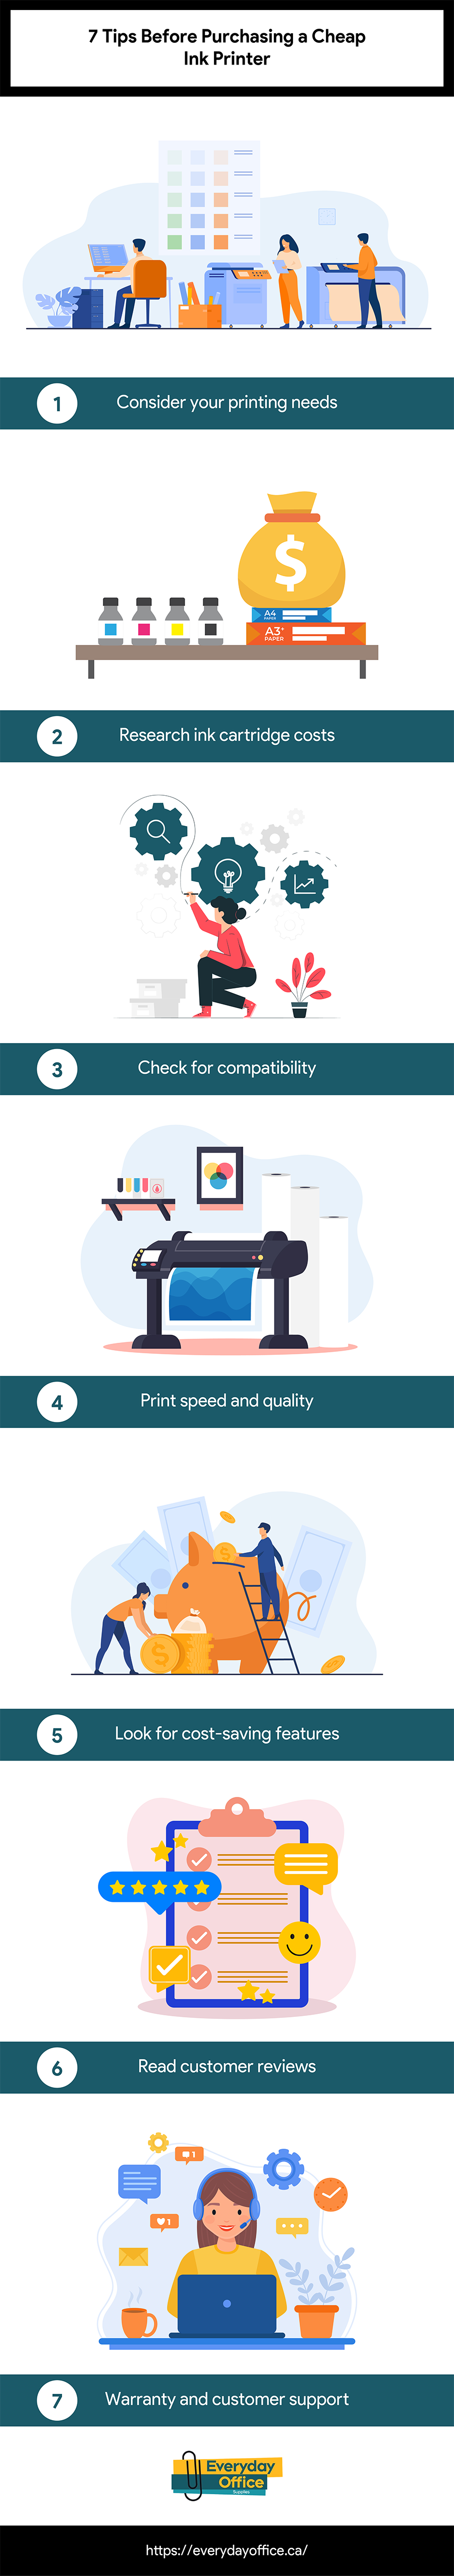 7 Tips Before Purchasing a Cheap Ink Printer 